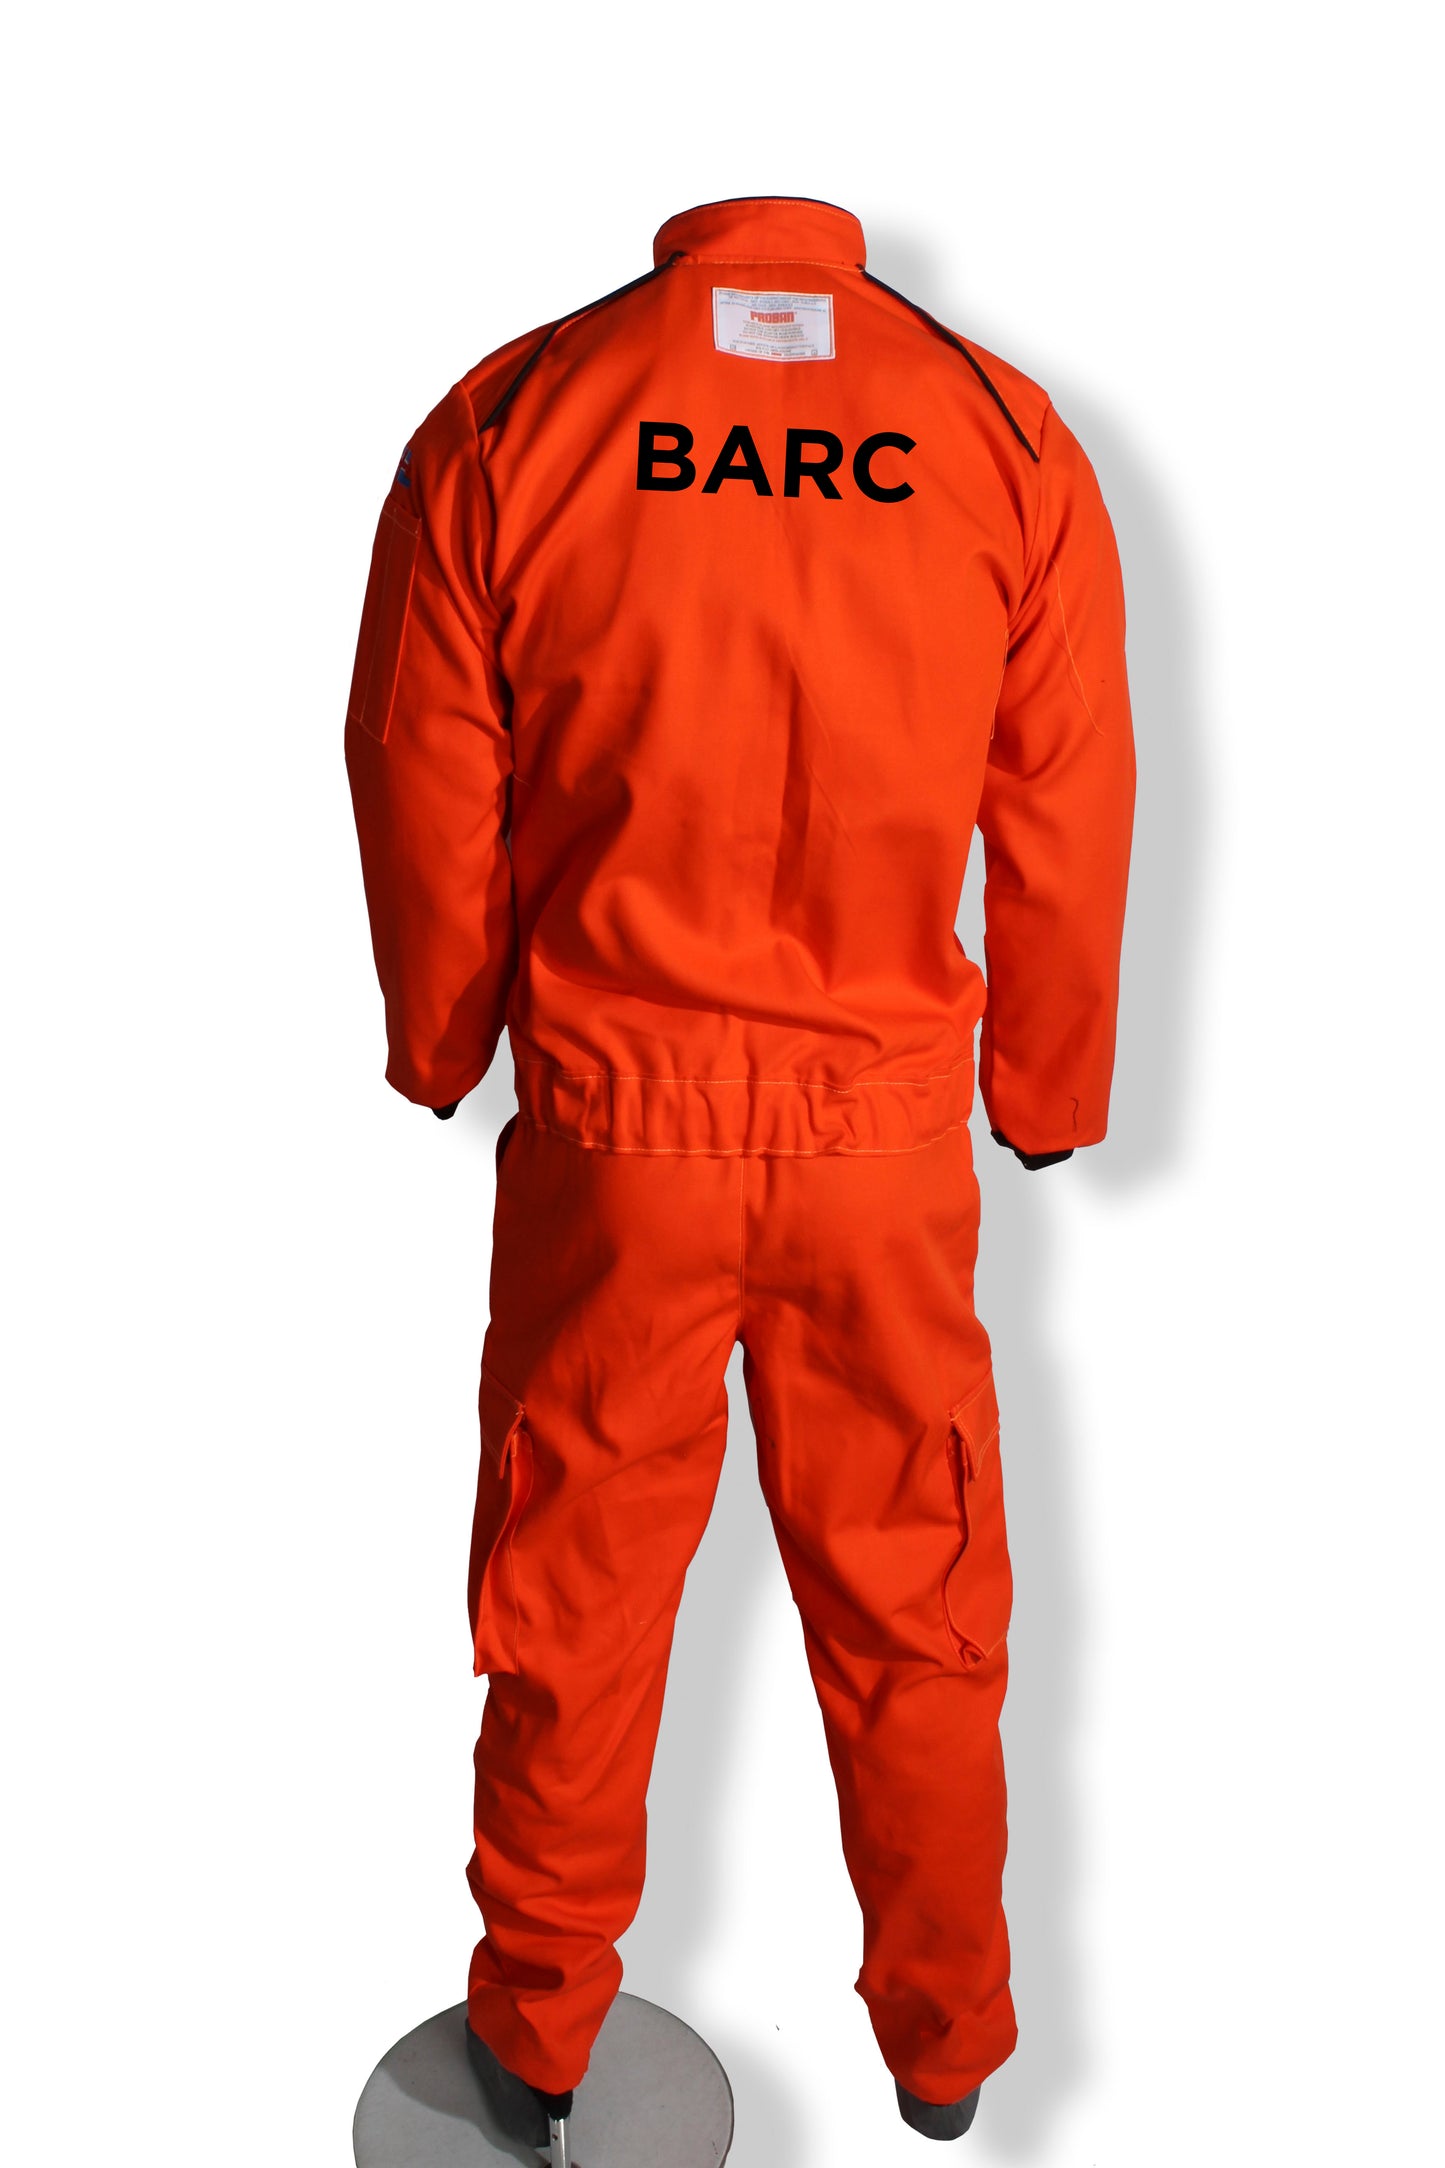 Official BARC Marshal Two Piece Suit - Made-to-Measure